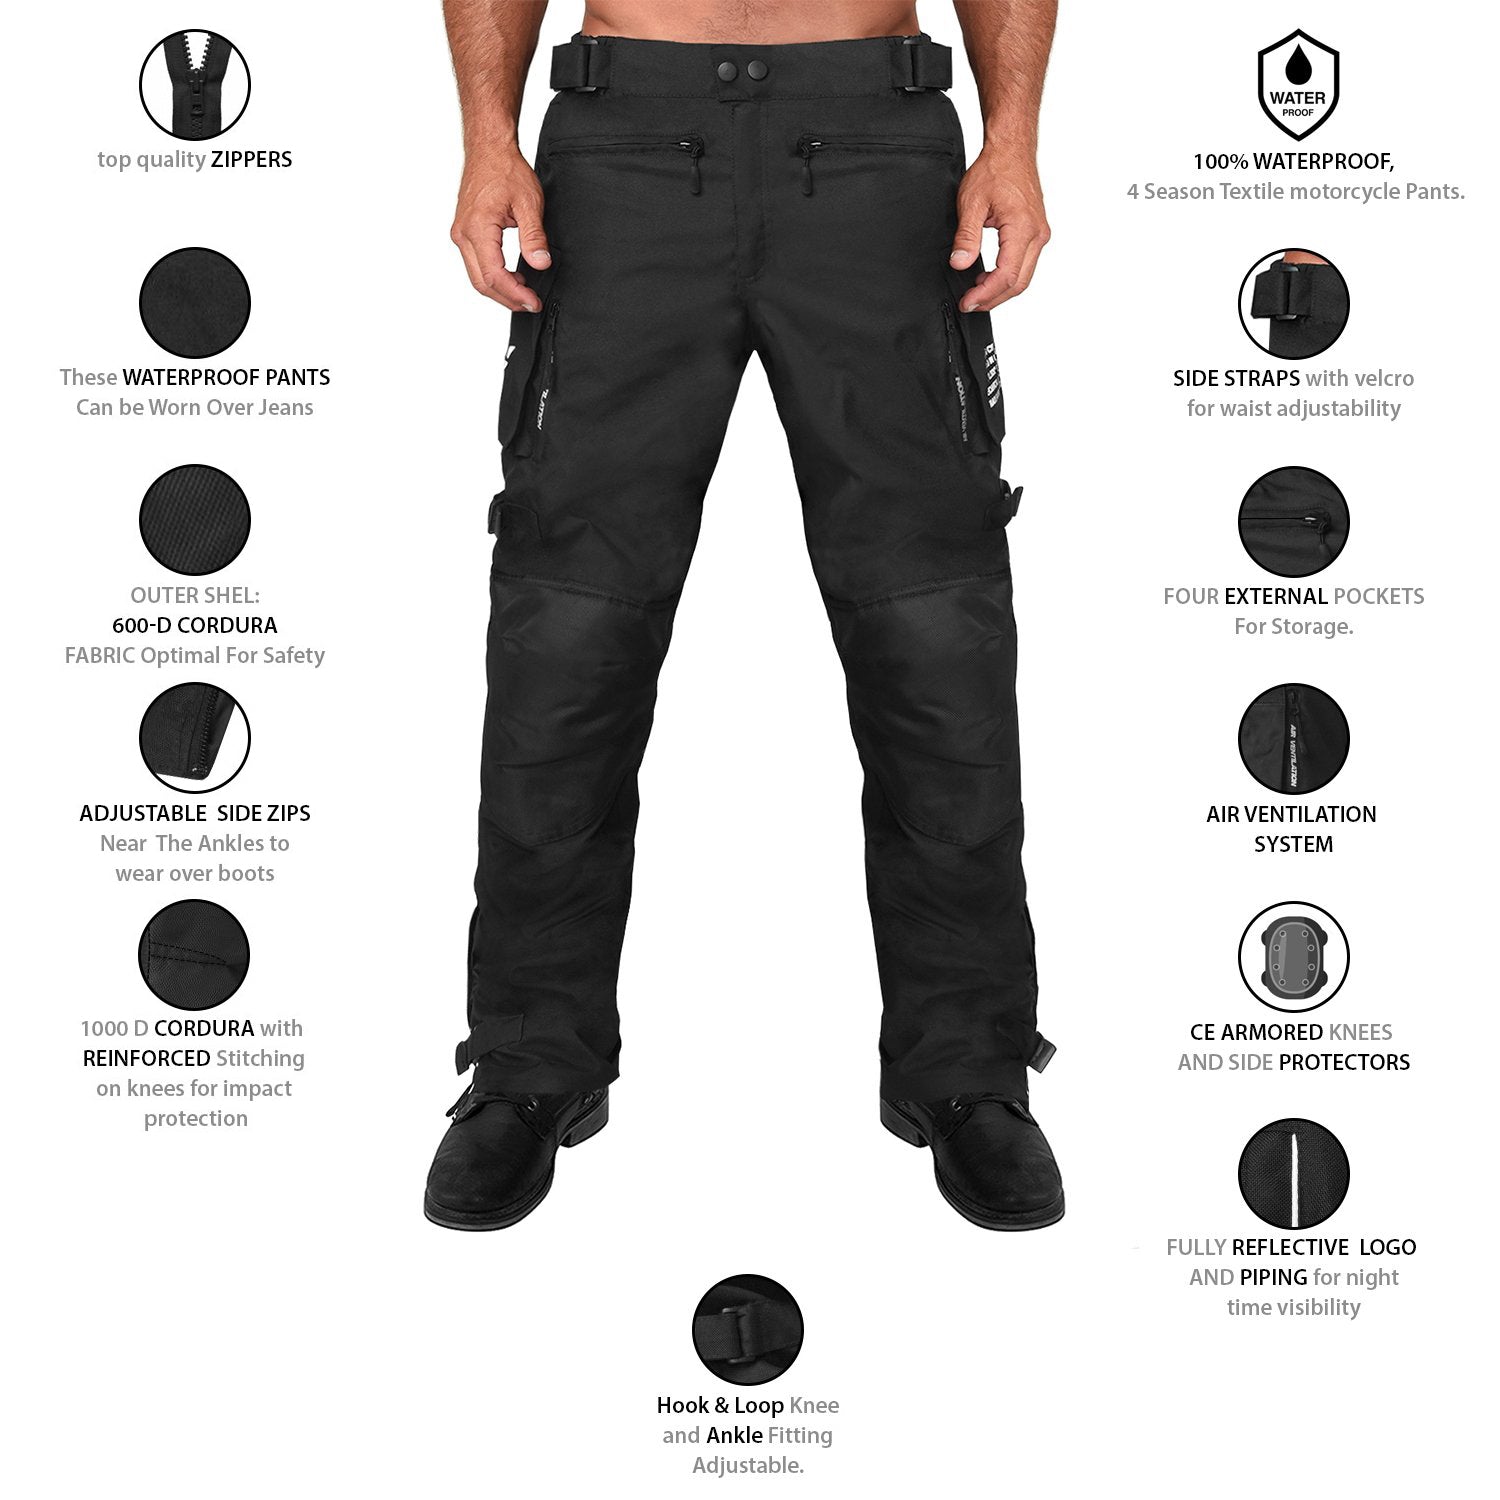 BikesterGlobal | Top Motorcycle Riding Pant brands available in India